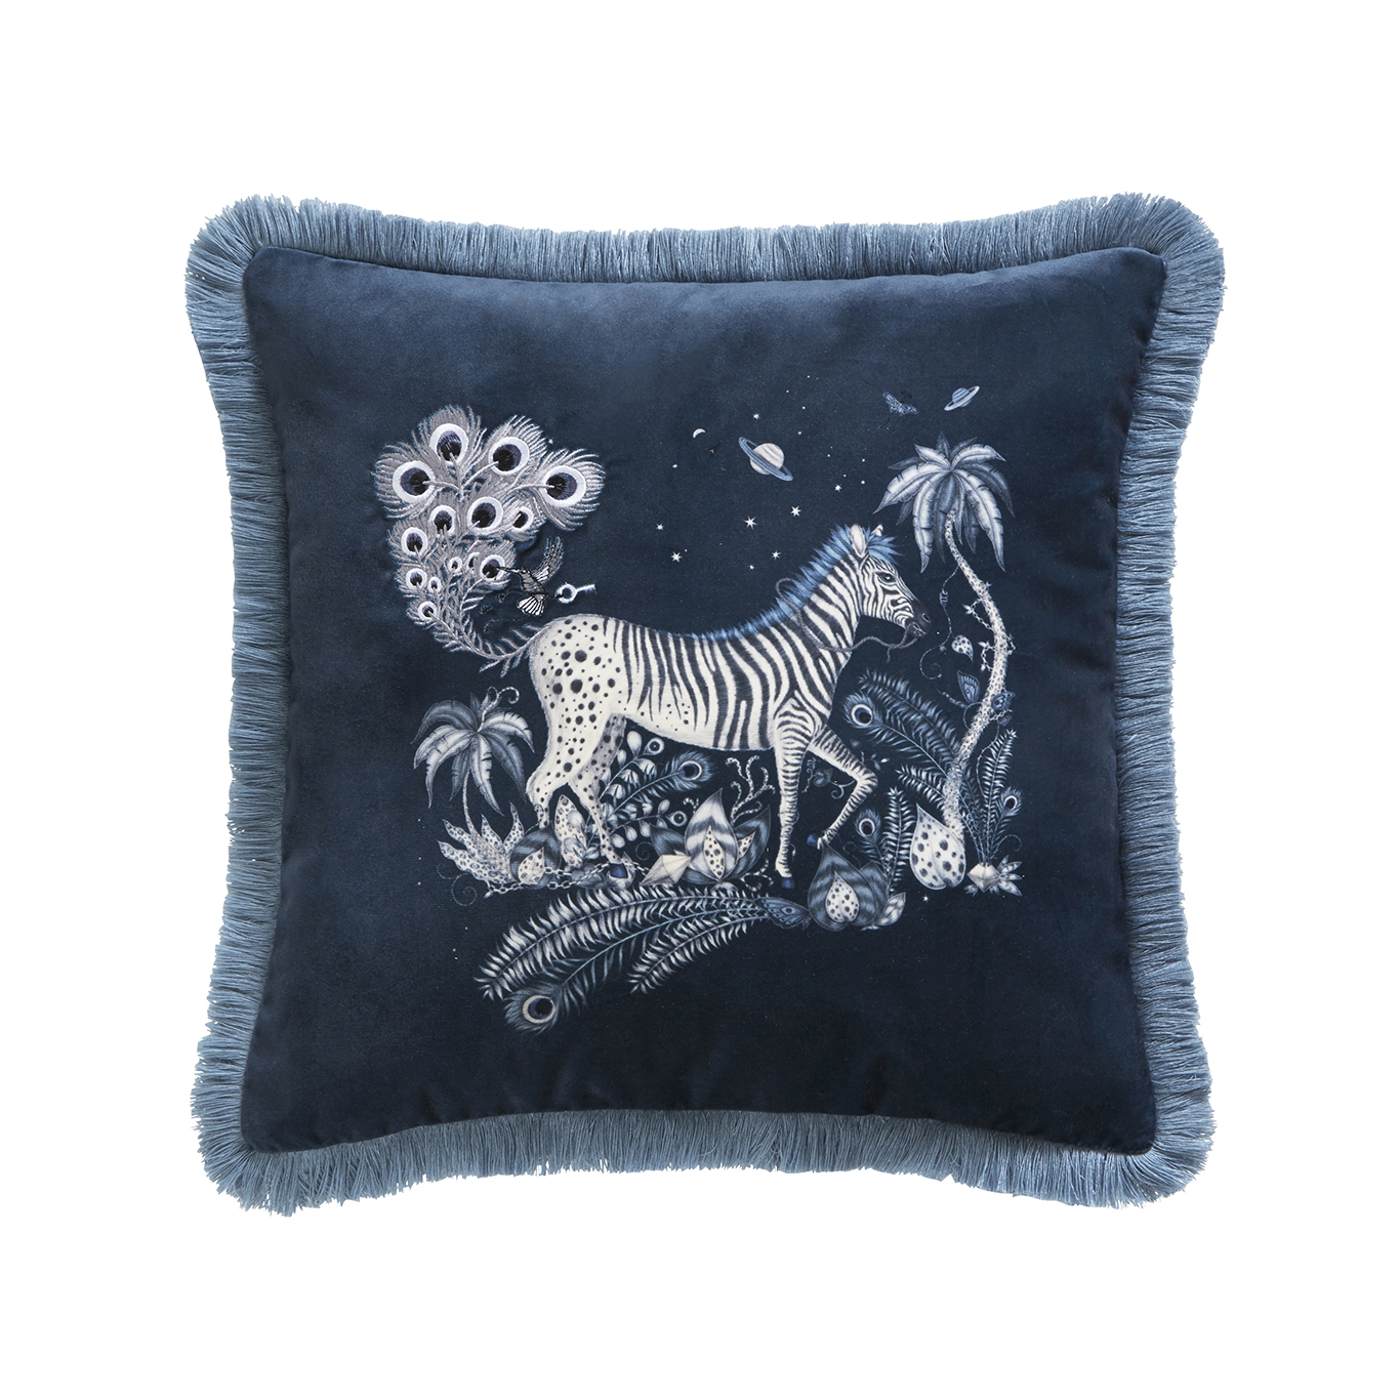 Lost World Square 43X43 Cushion Navy Bedding by CNC